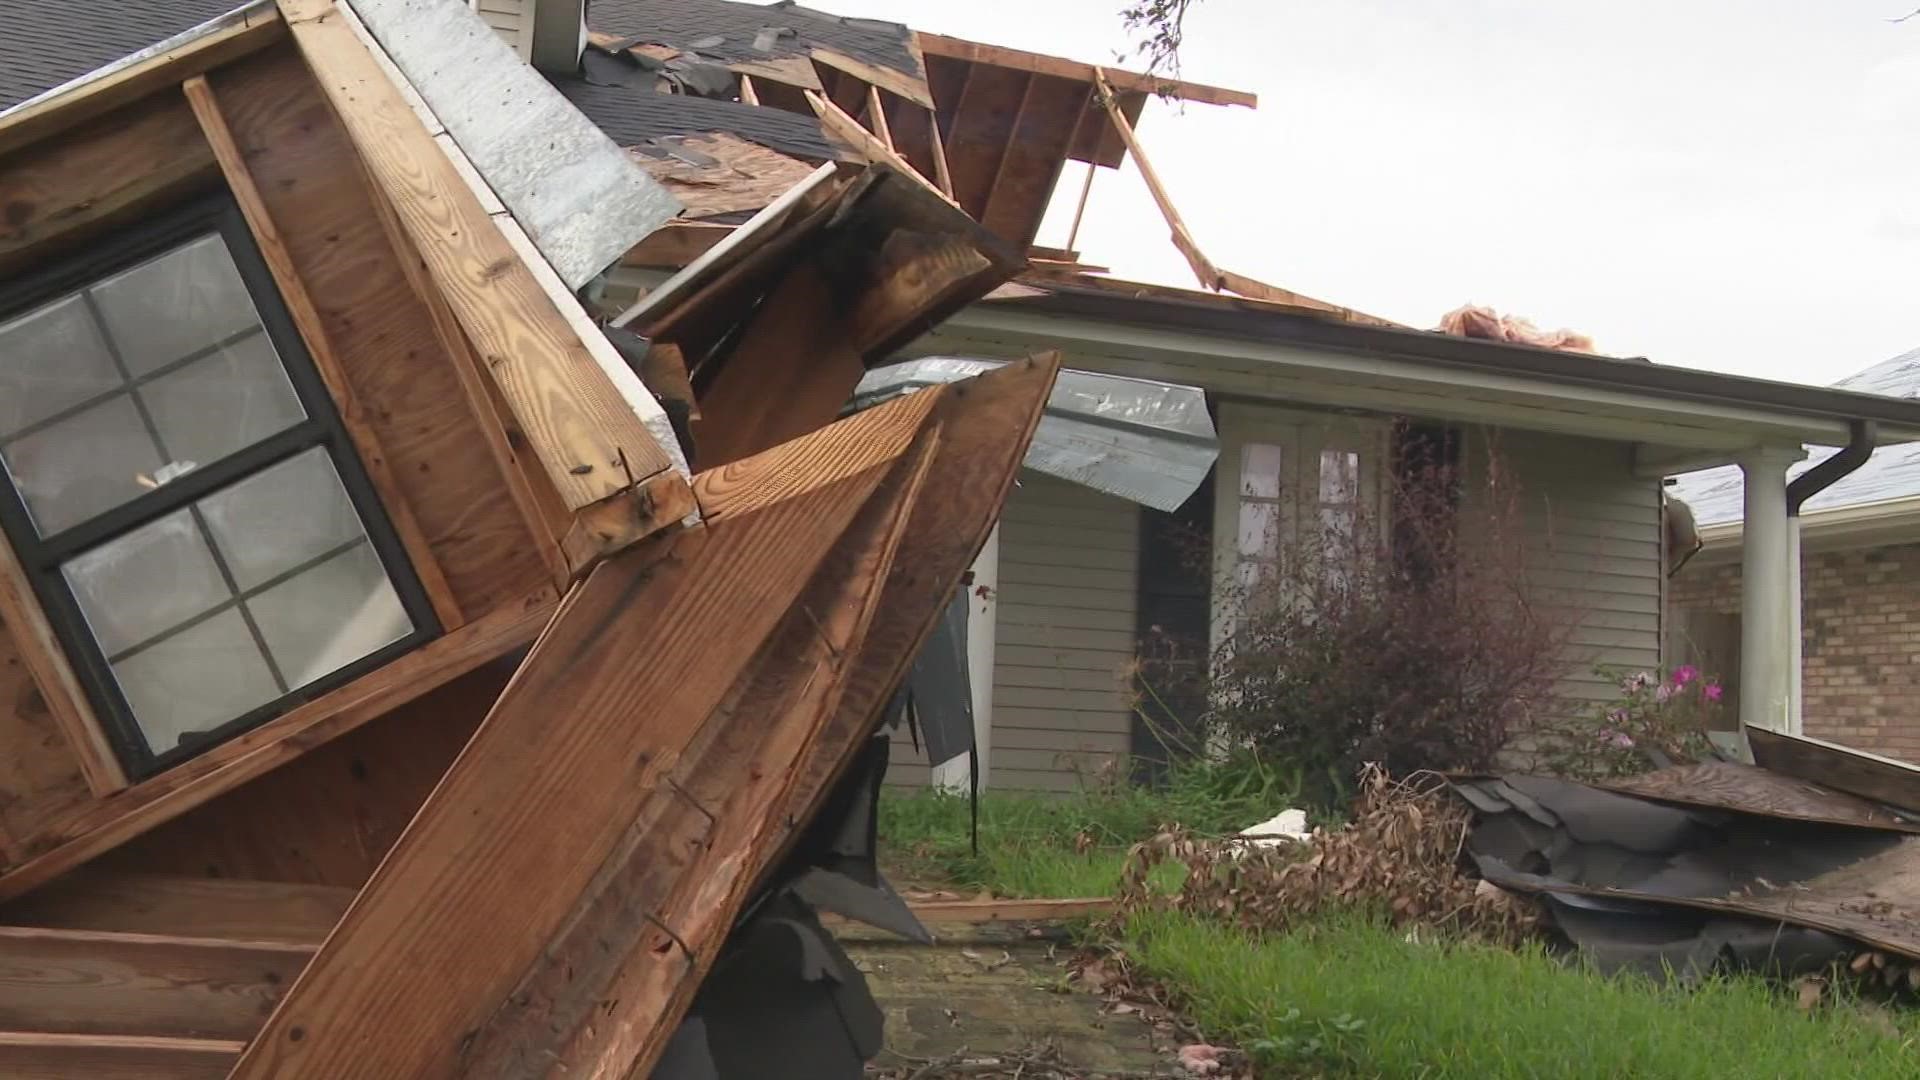 Terrebonne Parish residents are wondering when will FEMA send the help they promised as they are now suffering from a housing crisis after Ida.